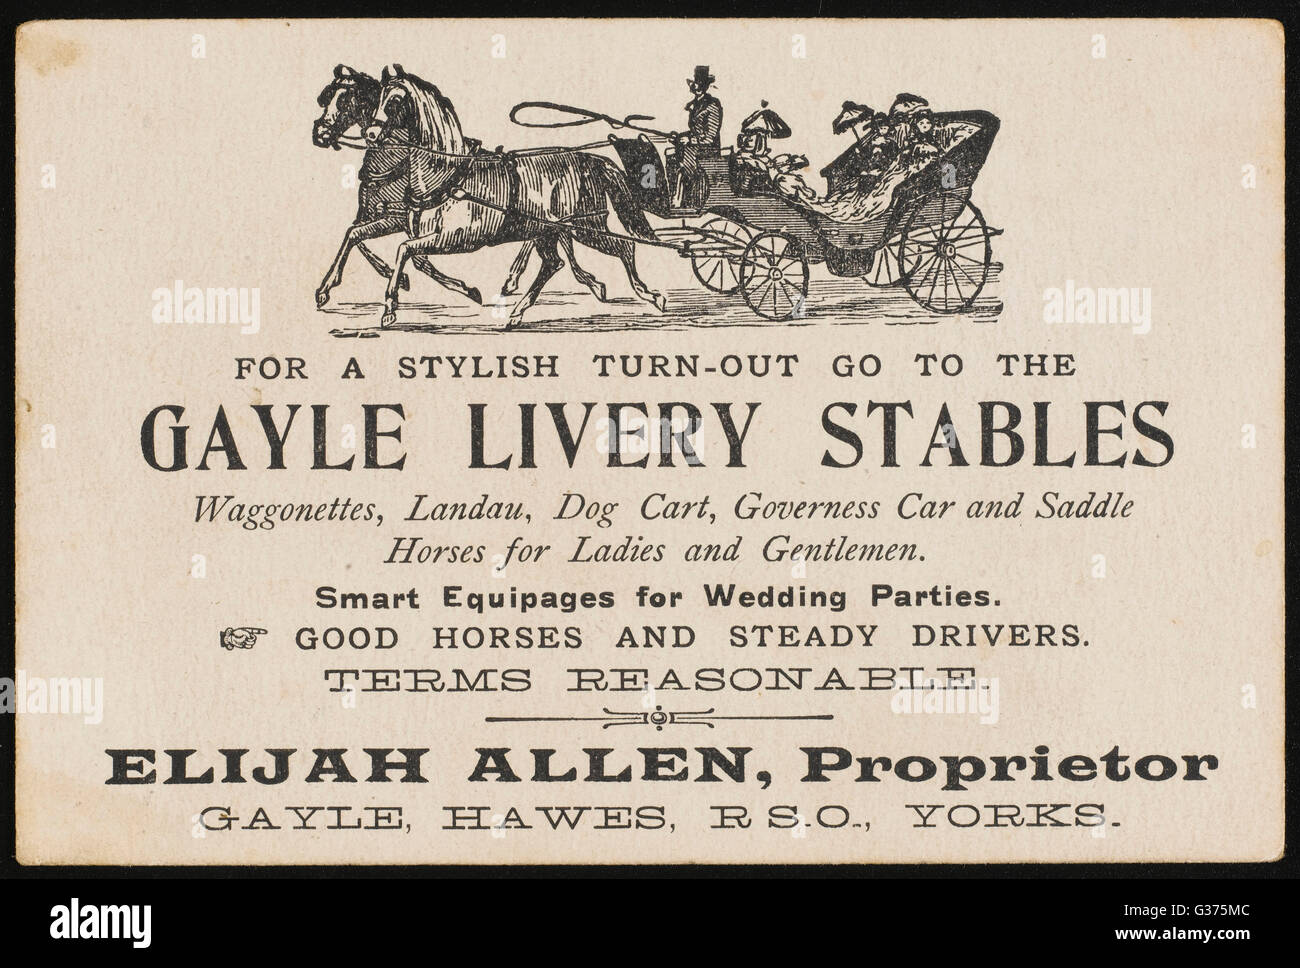 At a livery stable you can  hire a waggonette, a landau, a  dog cart, a governess car or a  saddle horse - smart equipages  for wedding parties - good  horses and steady drivers...     Date: late 19th century Stock Photo